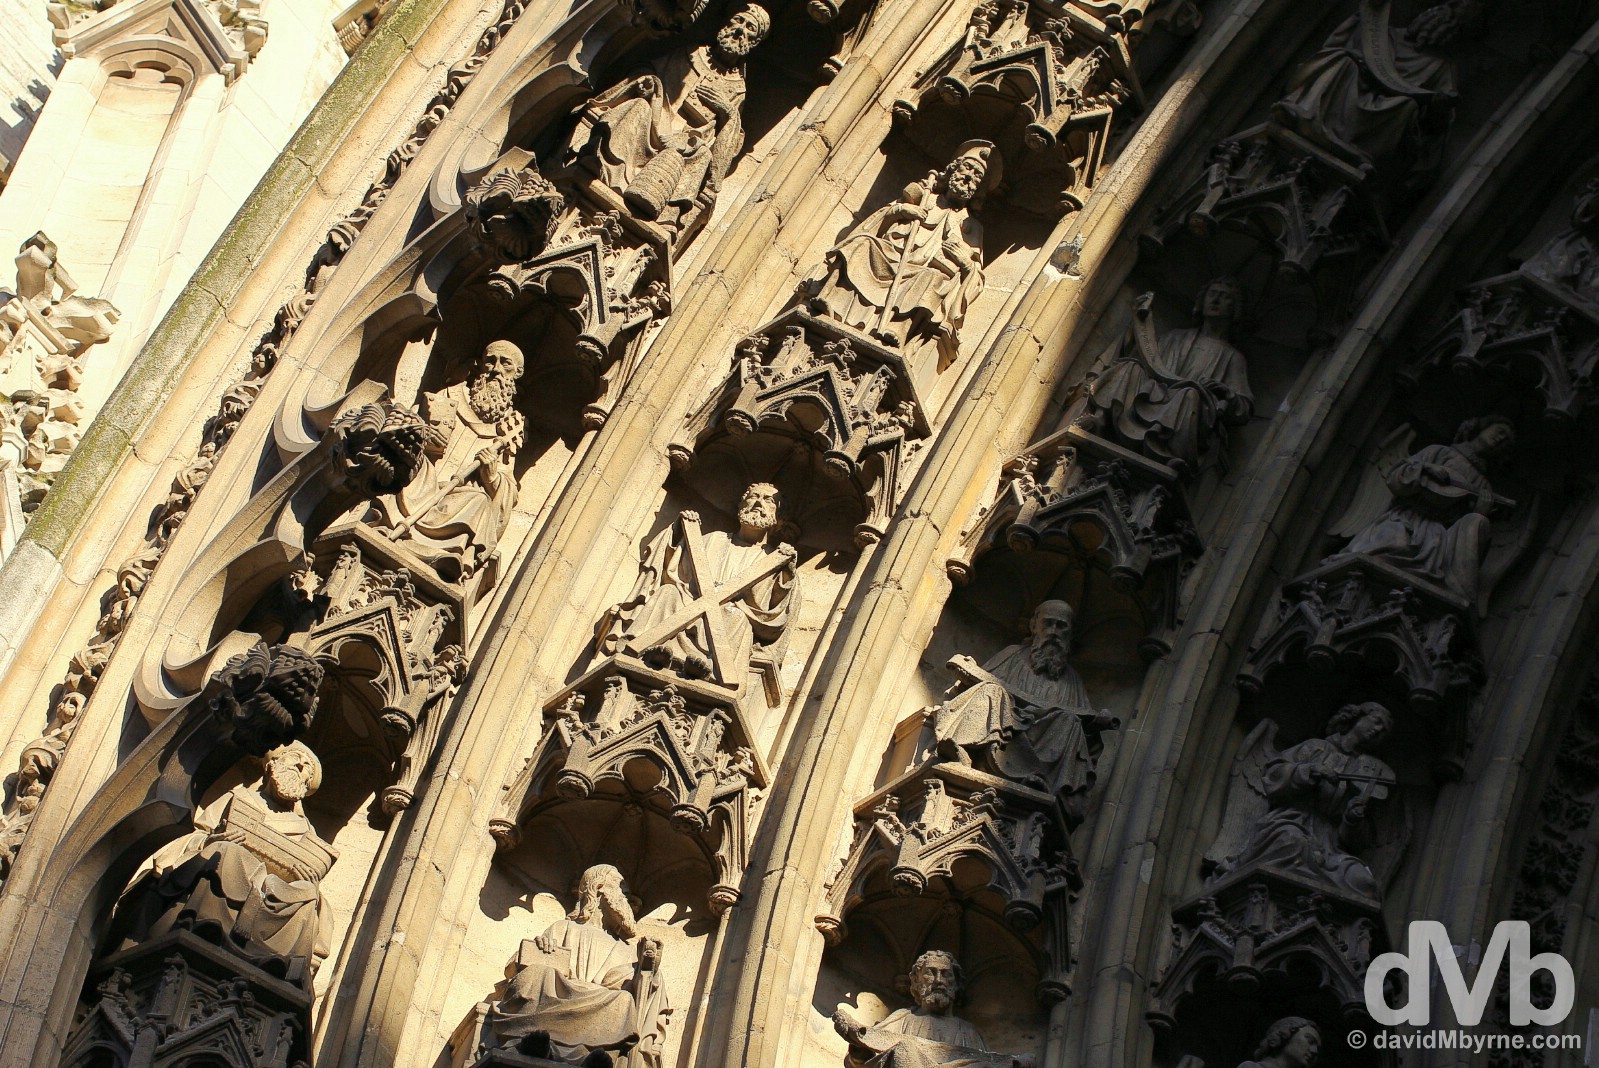 Detail above the main entrance to the Onze Lieve Vrouwekathedraal in Antwerp, Belgium. January 17, 2016.